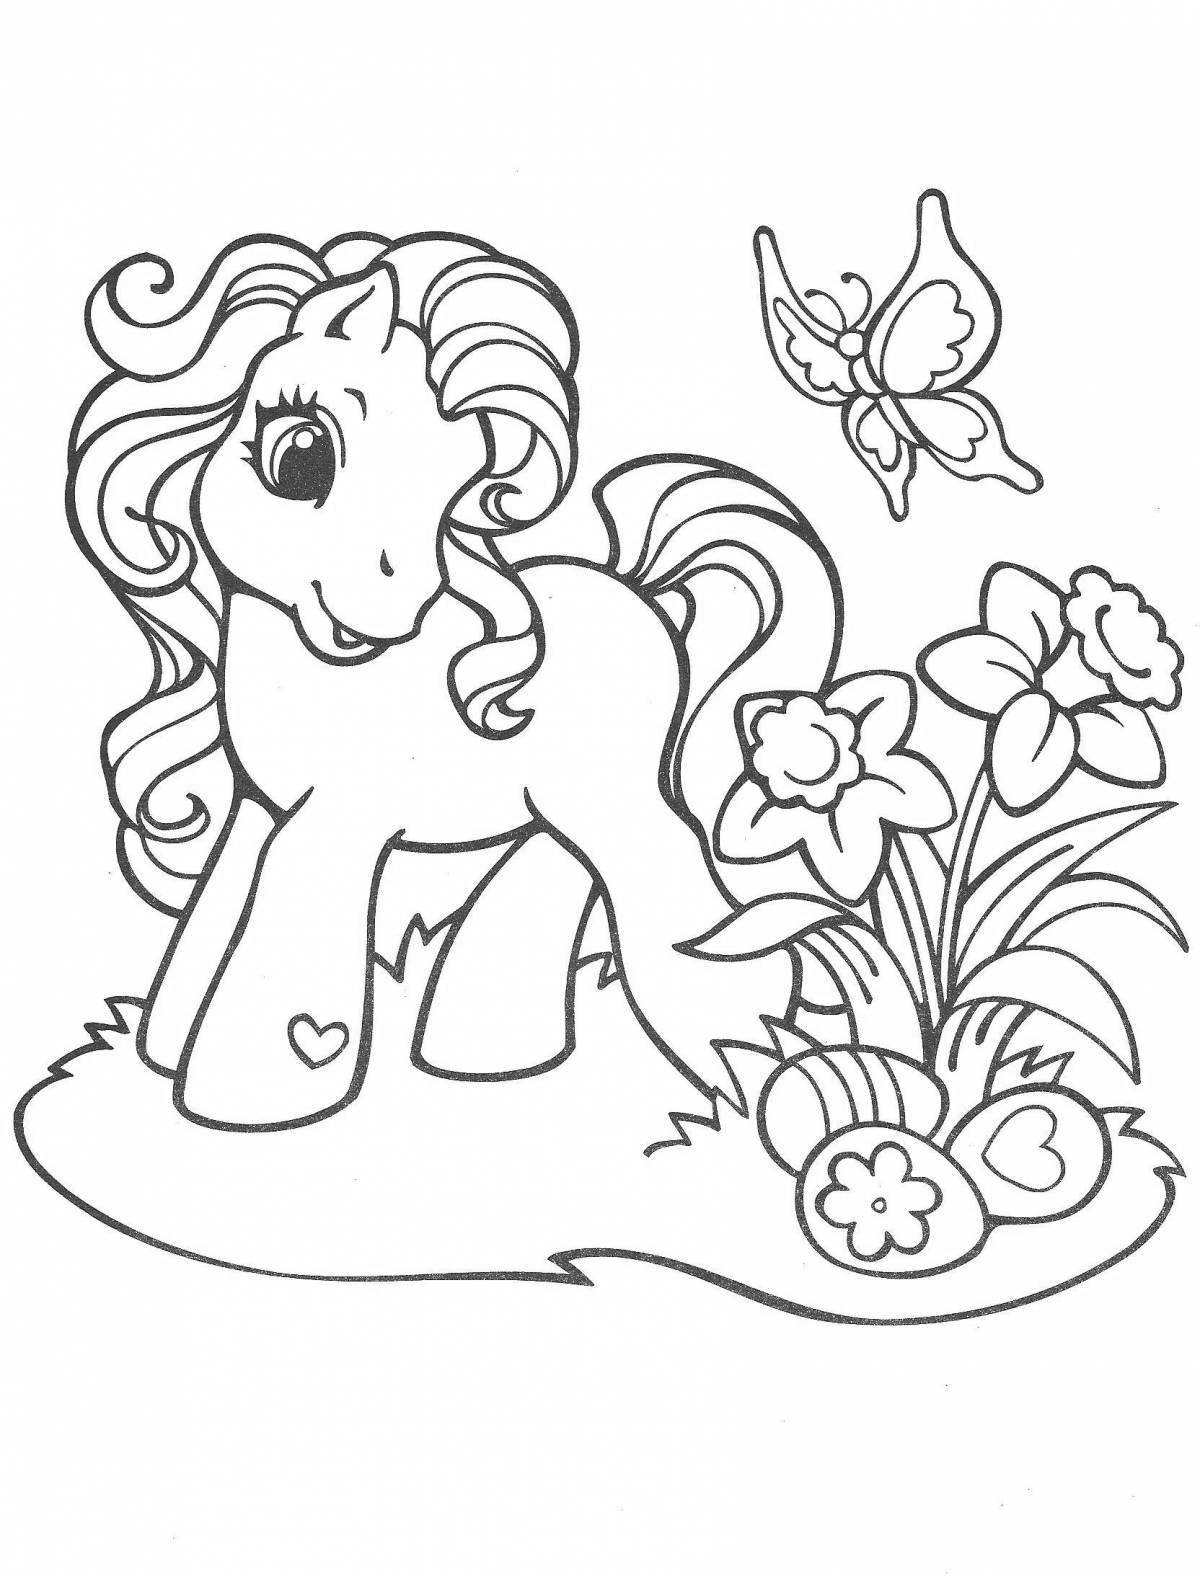 Adorable horse coloring book for kids 5-6 years old